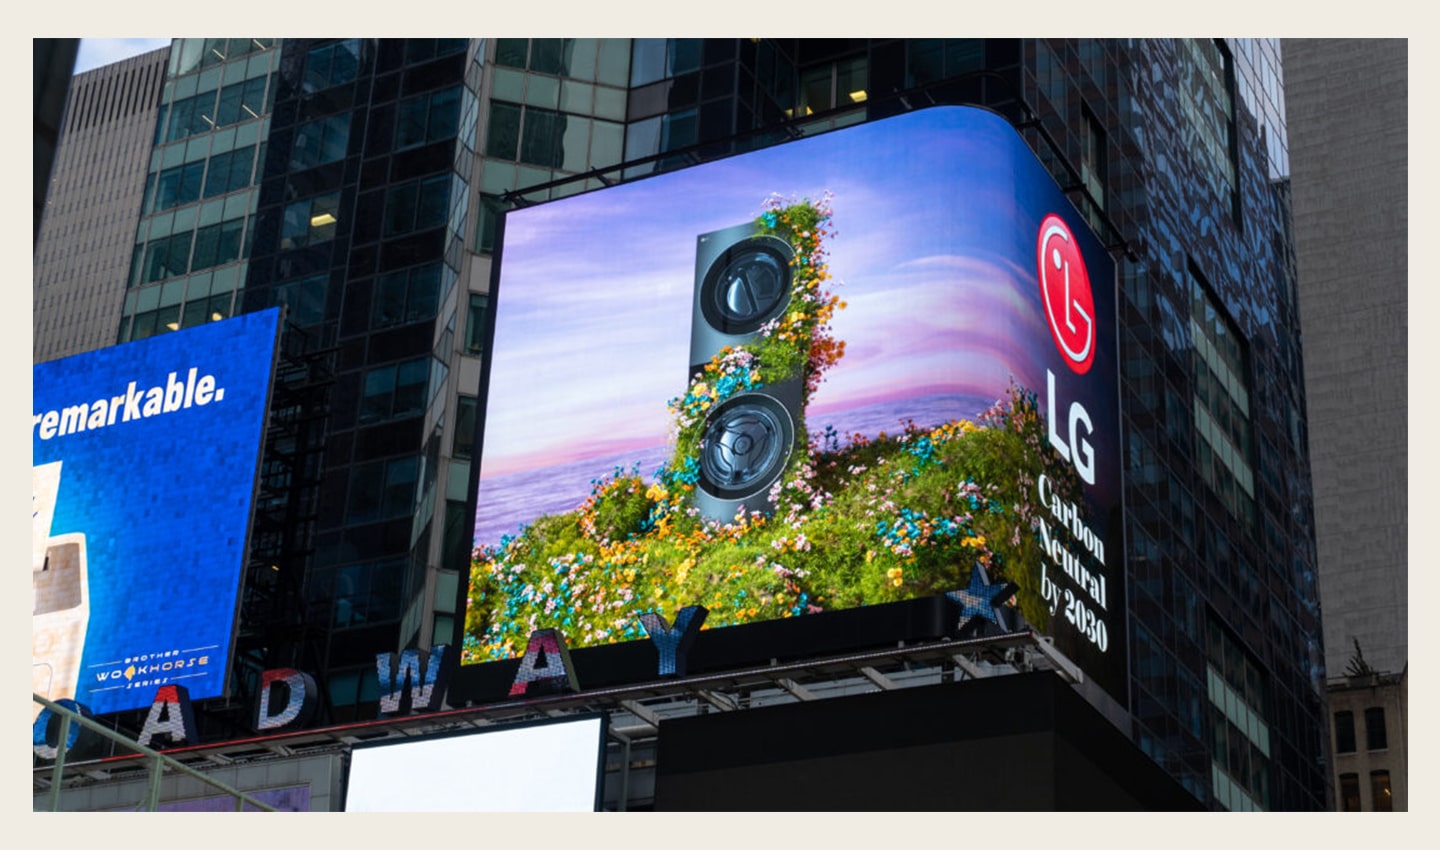 A special video capturing LG's green initiatives will debut on the Times Square billboard in New York City on Earth Day, April 22. To learn more about LG Electronics' ENERGY STAR-certified products and green initiatives, please visit www.LG.com.